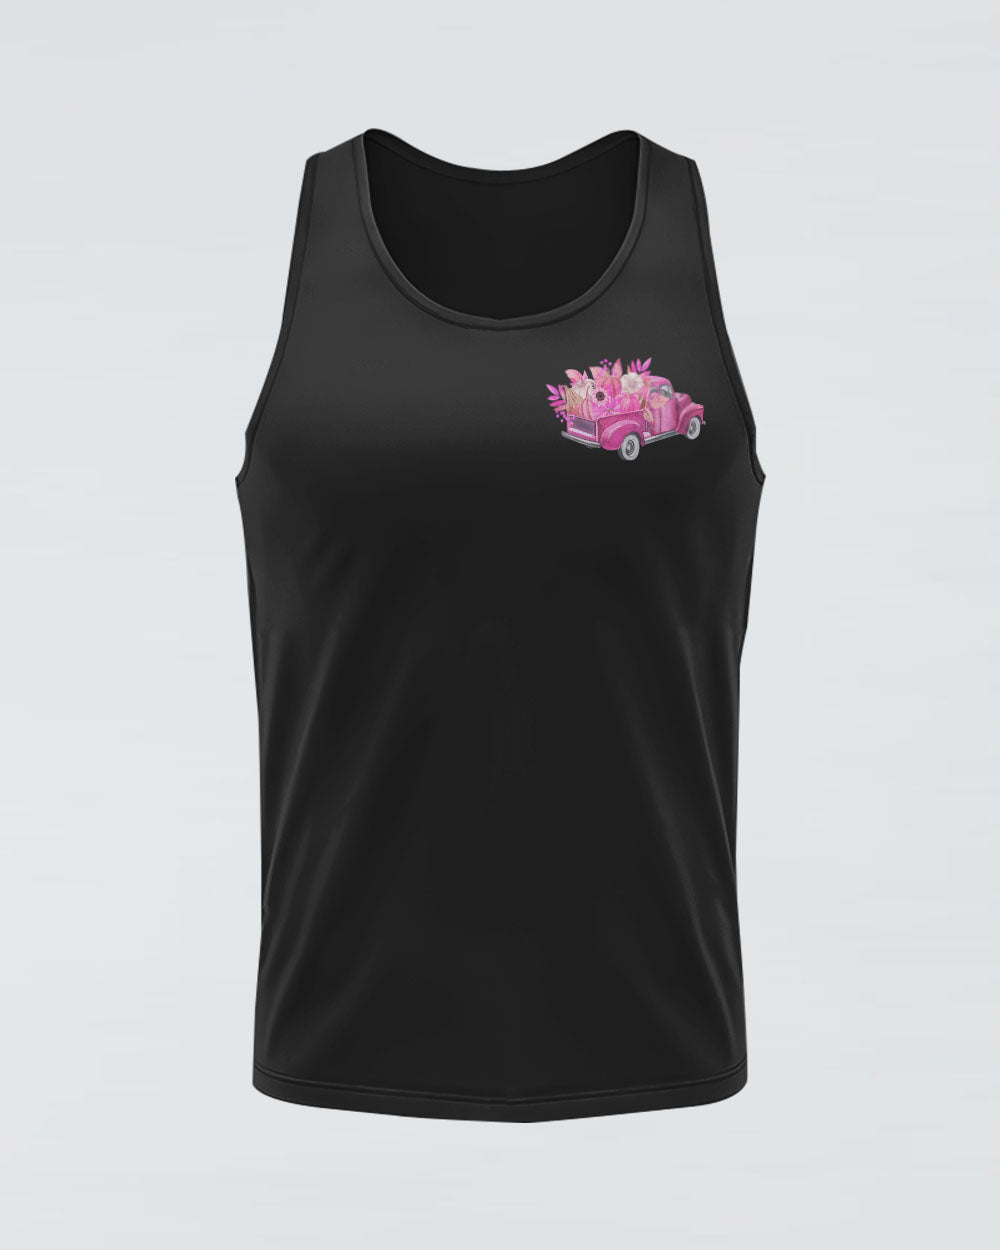 In October We Wear Pink Truck Flag Women's Breast Cancer Awareness Tanks